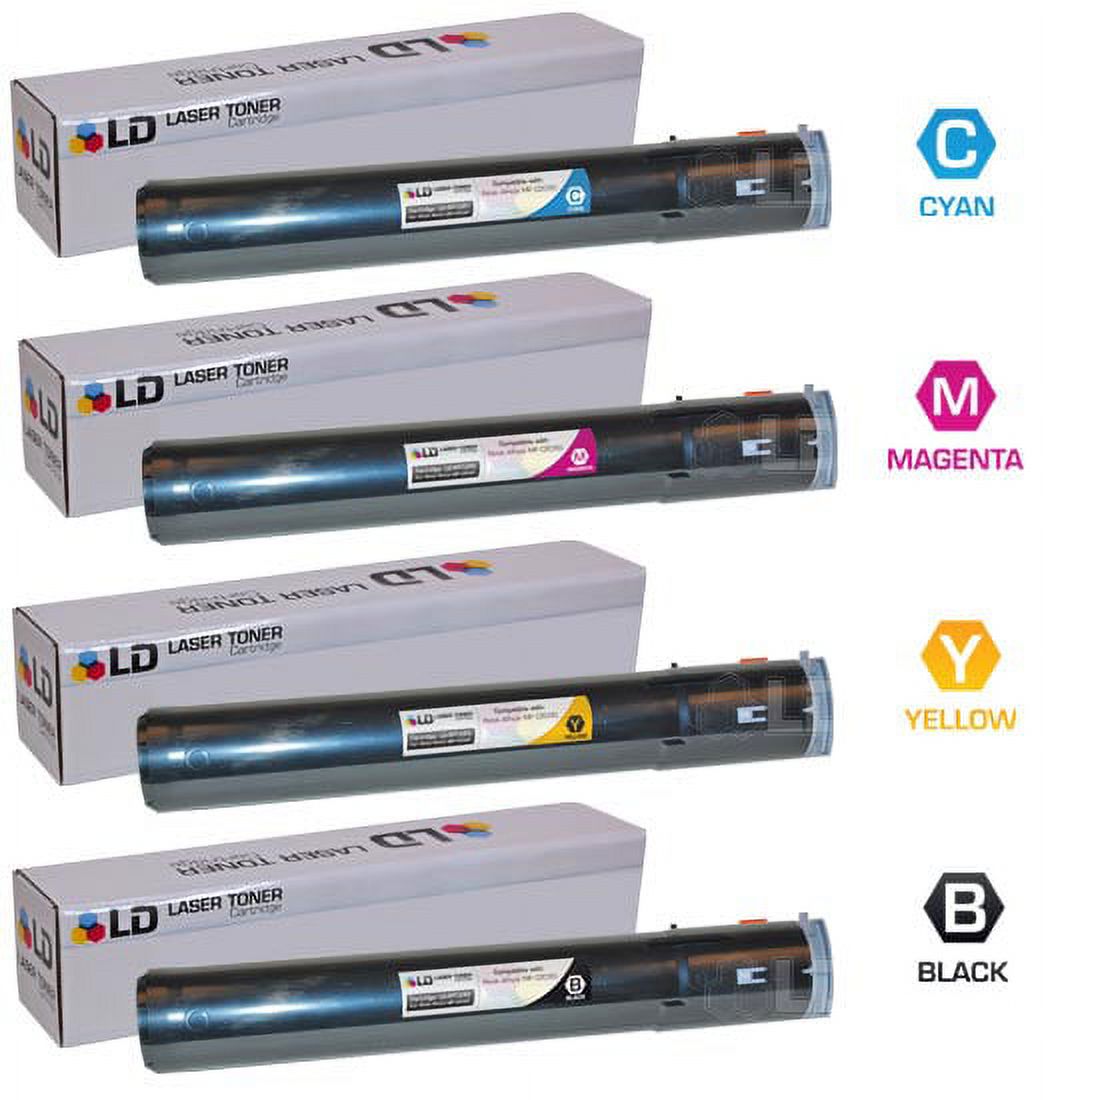 LD Compatible Replacements for Ricoh Aficio MP C2030 / C2050 / C2550 Set of 4 Laser Toner Cartridges Includes: 1 841280 Black, 1 841281 Cyan, 1 841282 Magenta, and 1 841283 Yellow - image 1 of 1